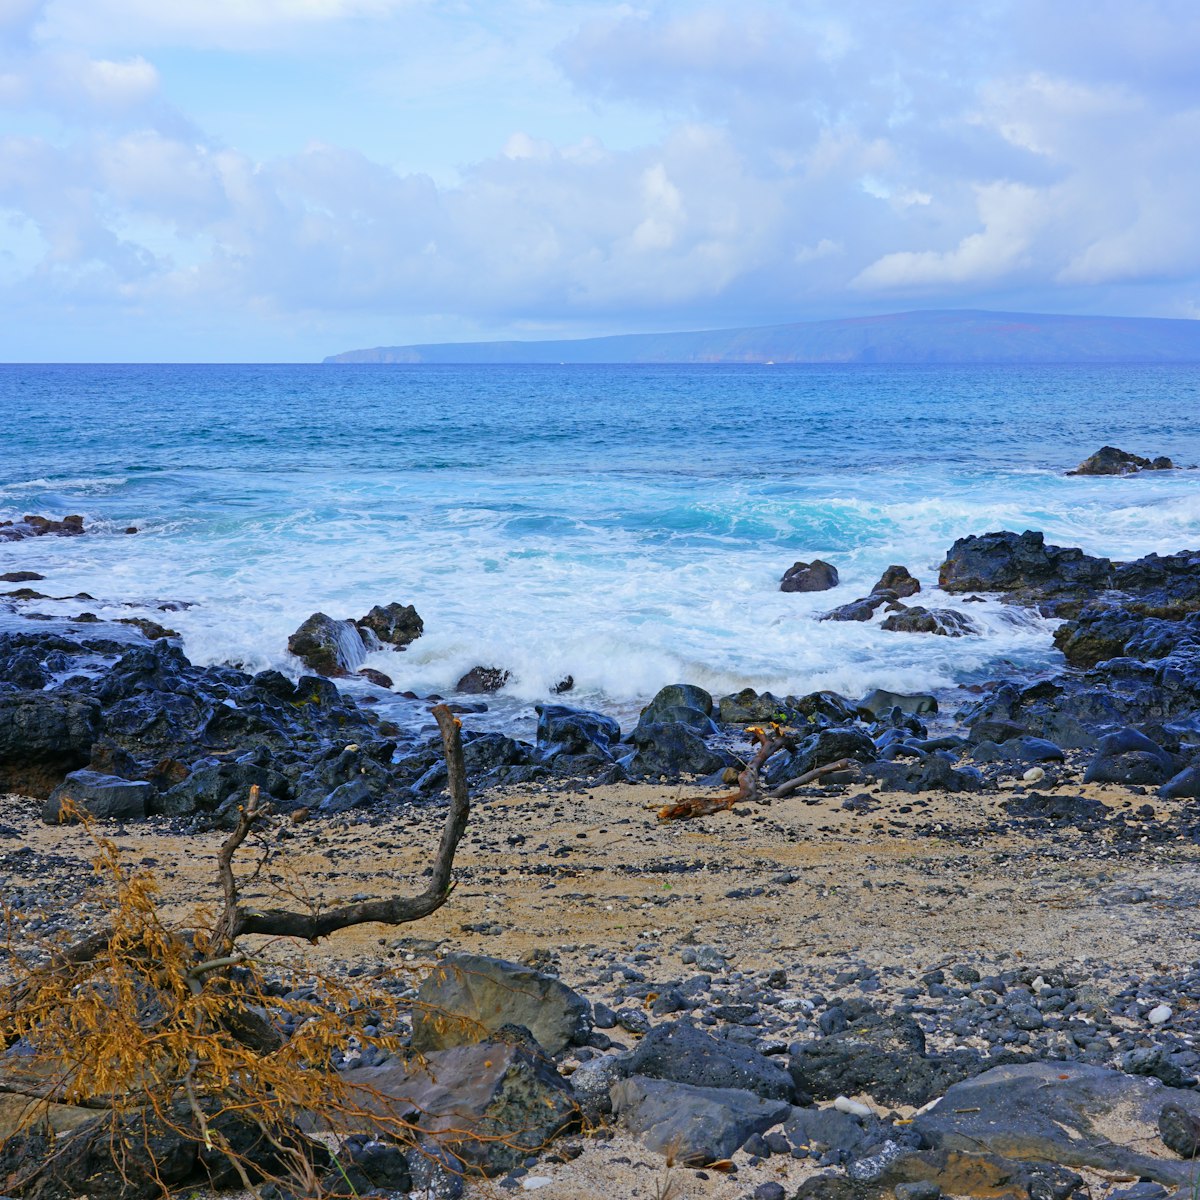 View of black lava rock and ocean at the Ahihi-Kinau Natural Area Reserve, on the West shore of Maui south of Wailea and Makena, Hawaii.